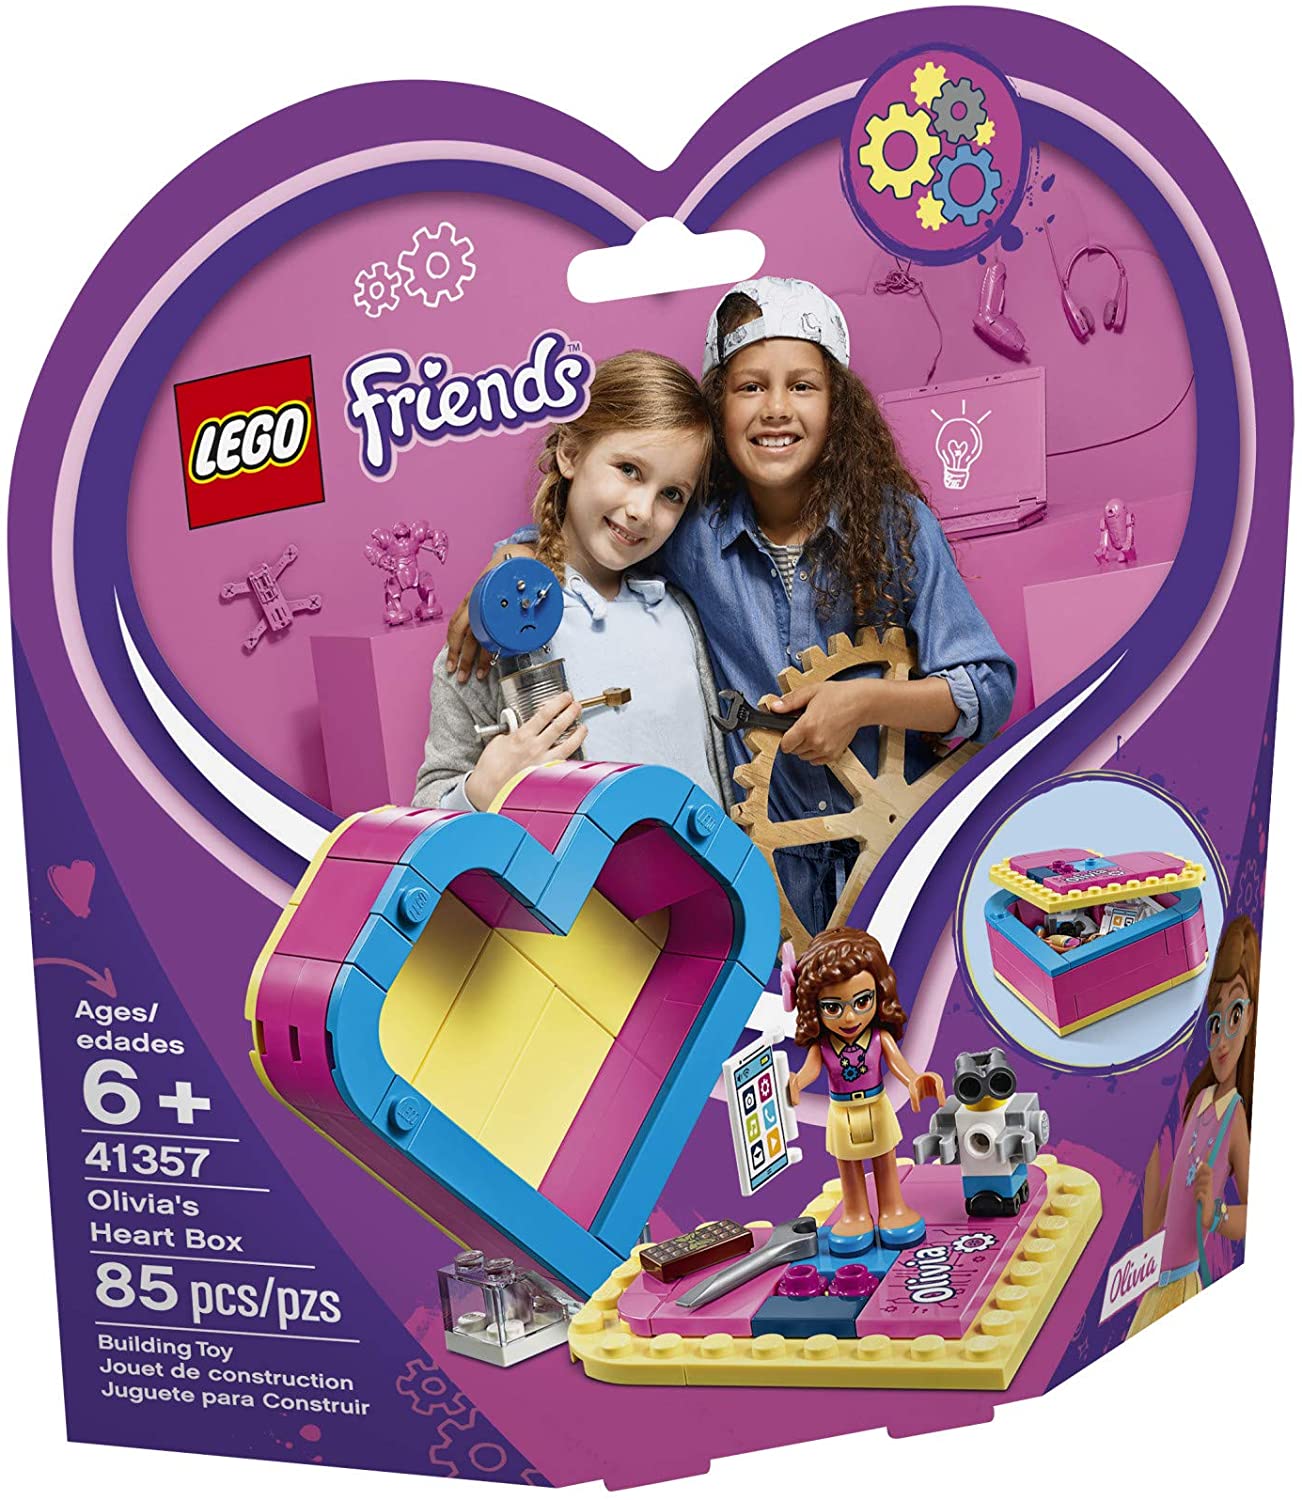 stad Opgetild Fabrikant LEGO® Friends 41357 Olivia's Heart Box (85 pieces) – AESOP'S FABLE